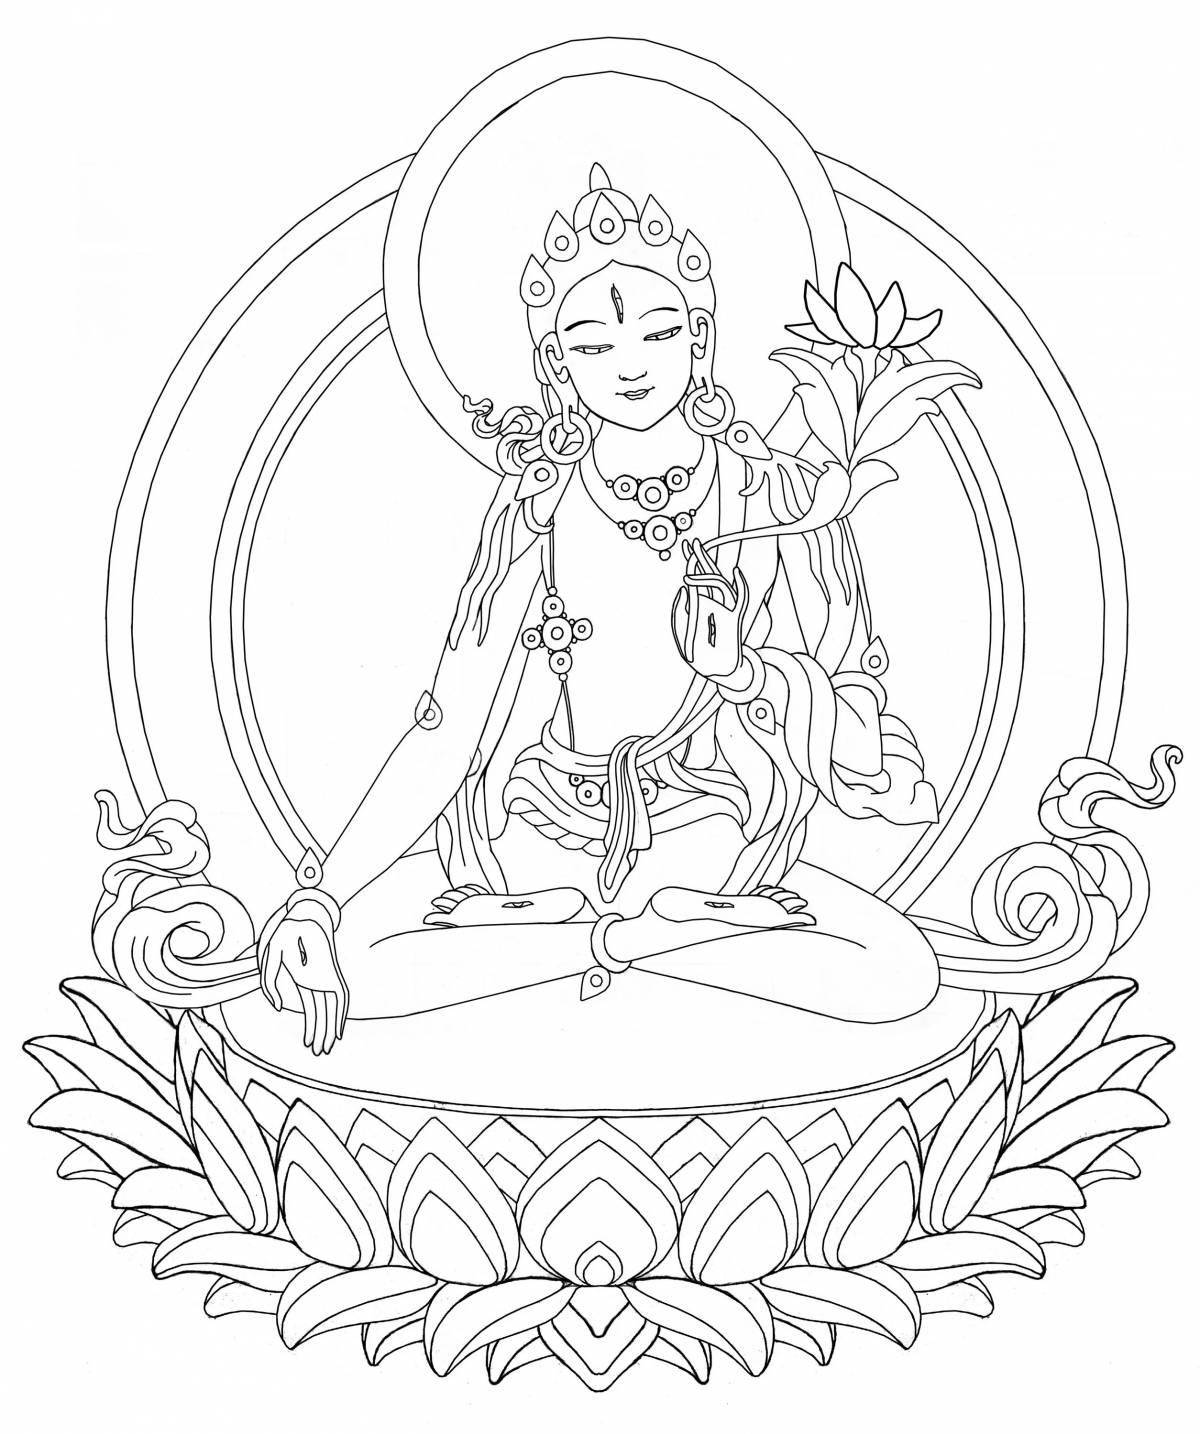 Incredible container coloring page